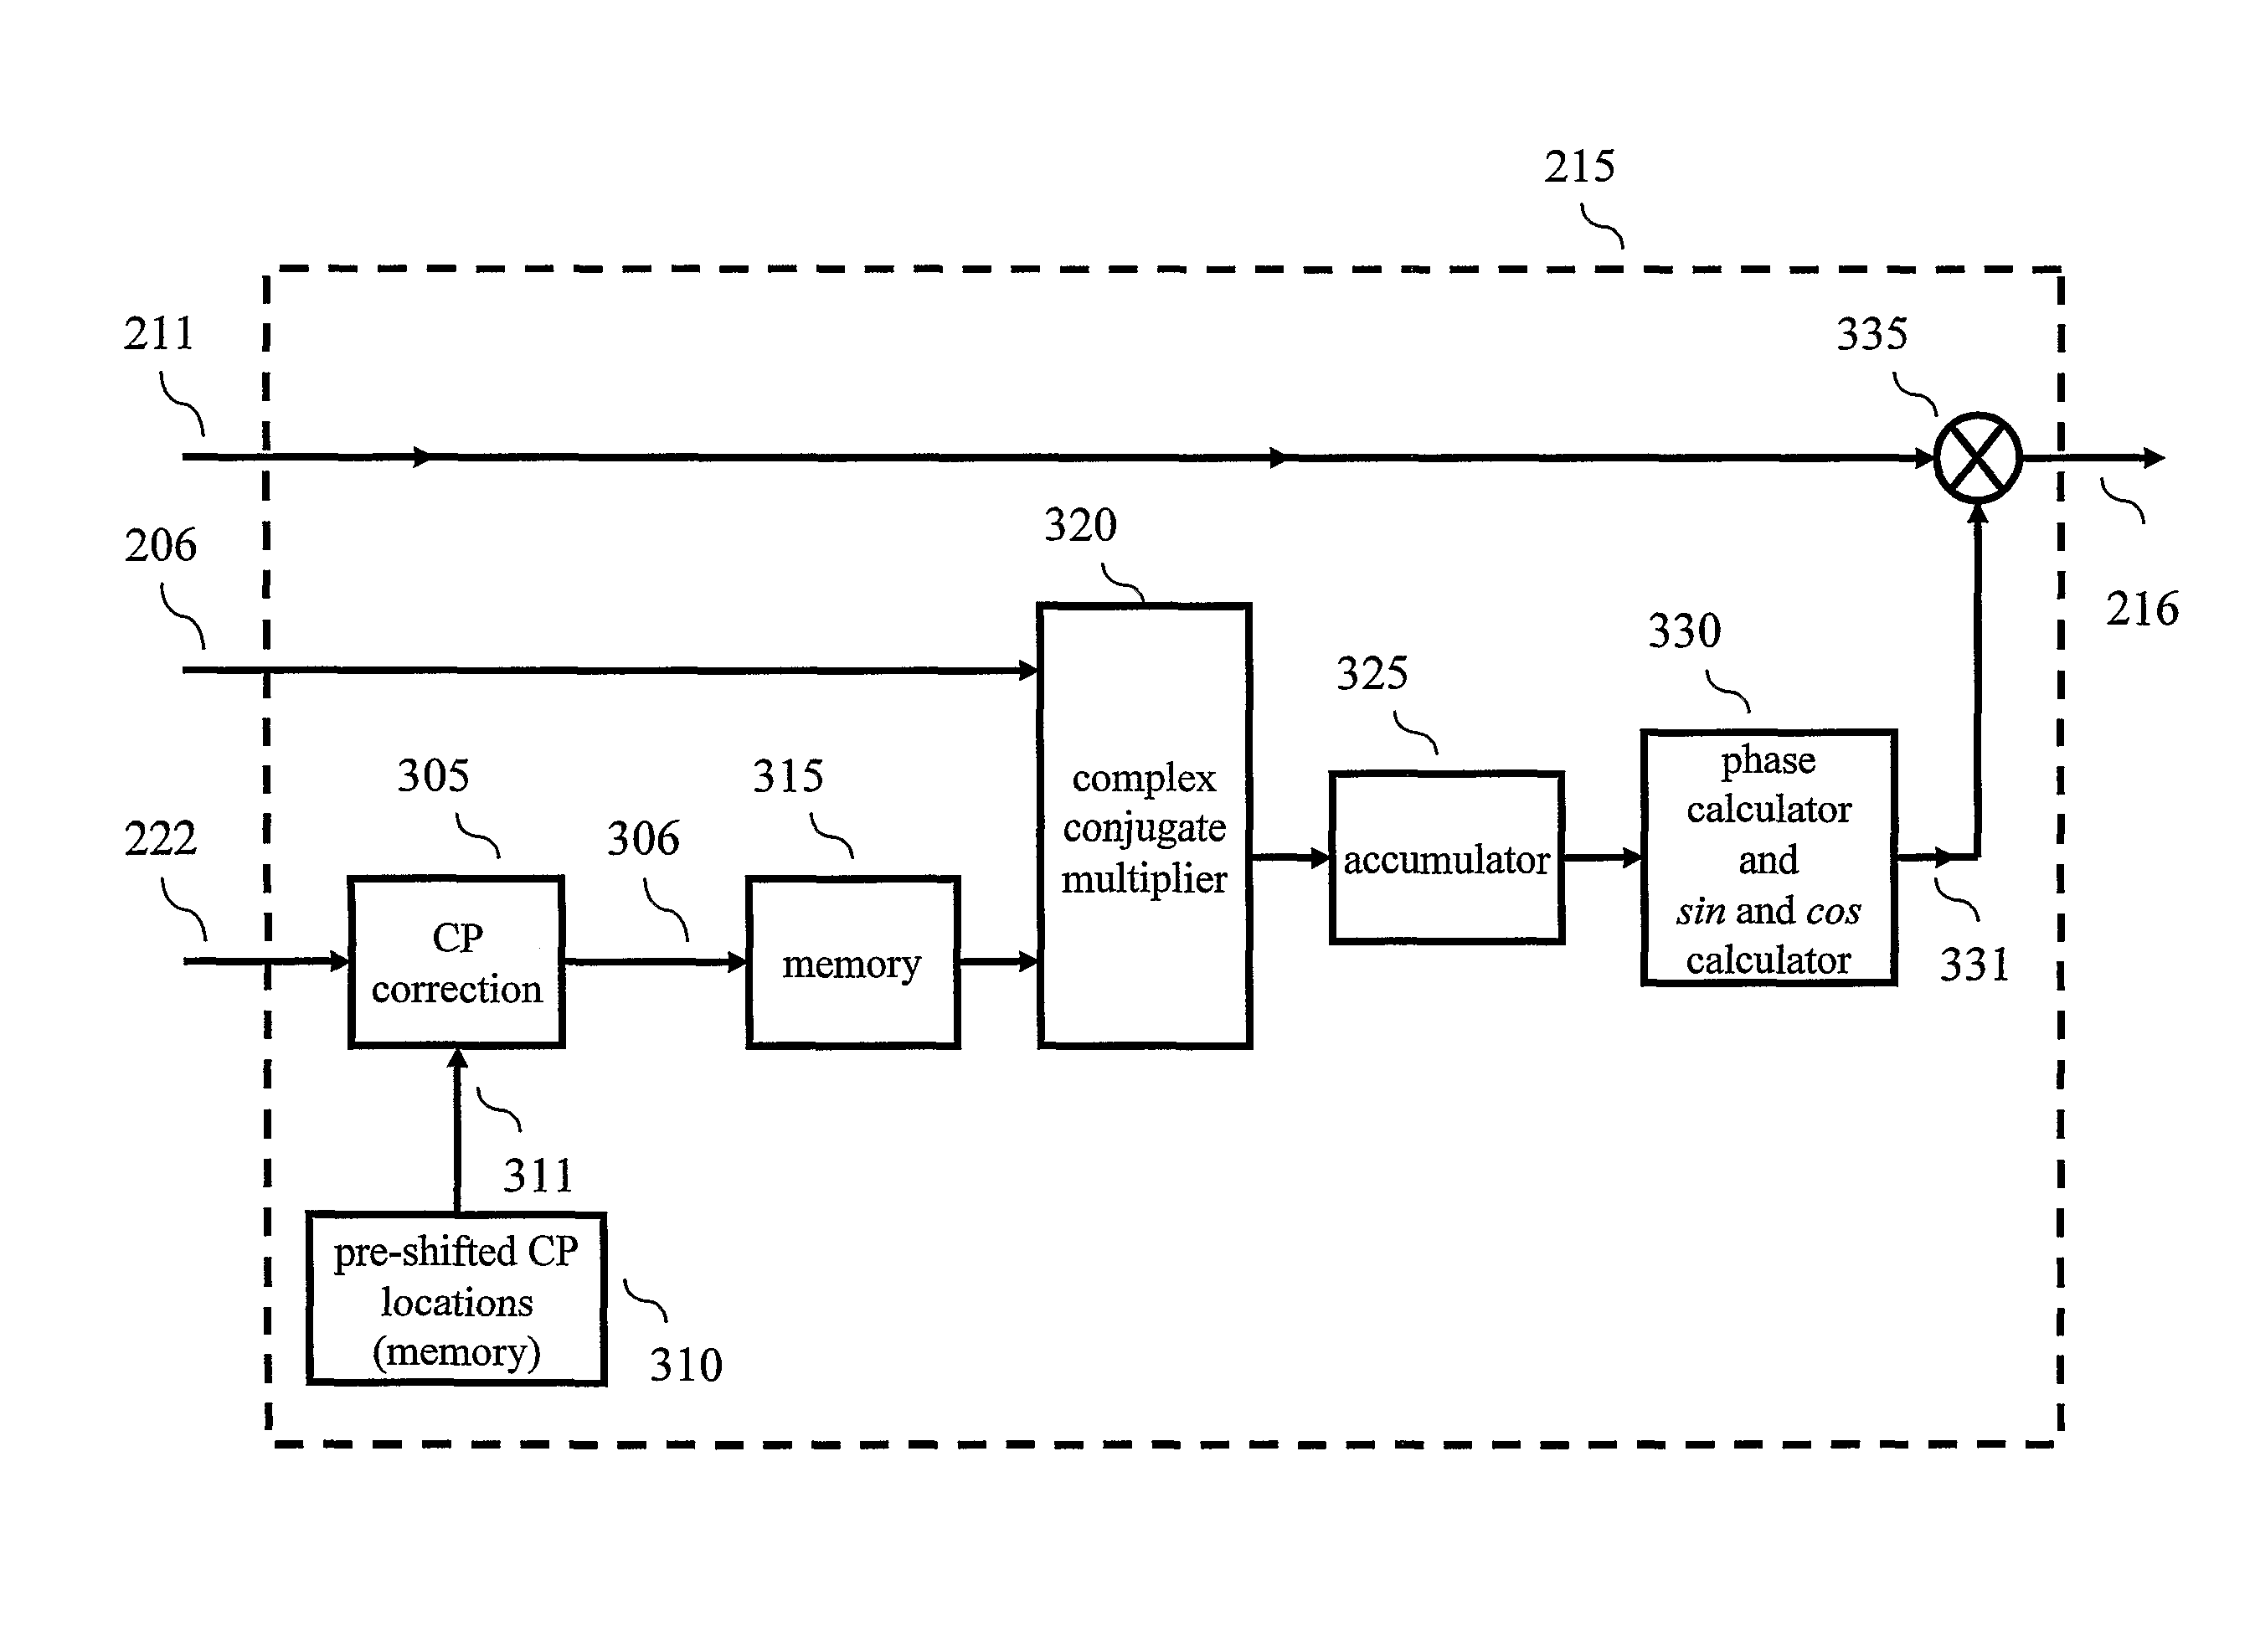 Apparatus and method for removing common phase error in a DVB-T/H receiver